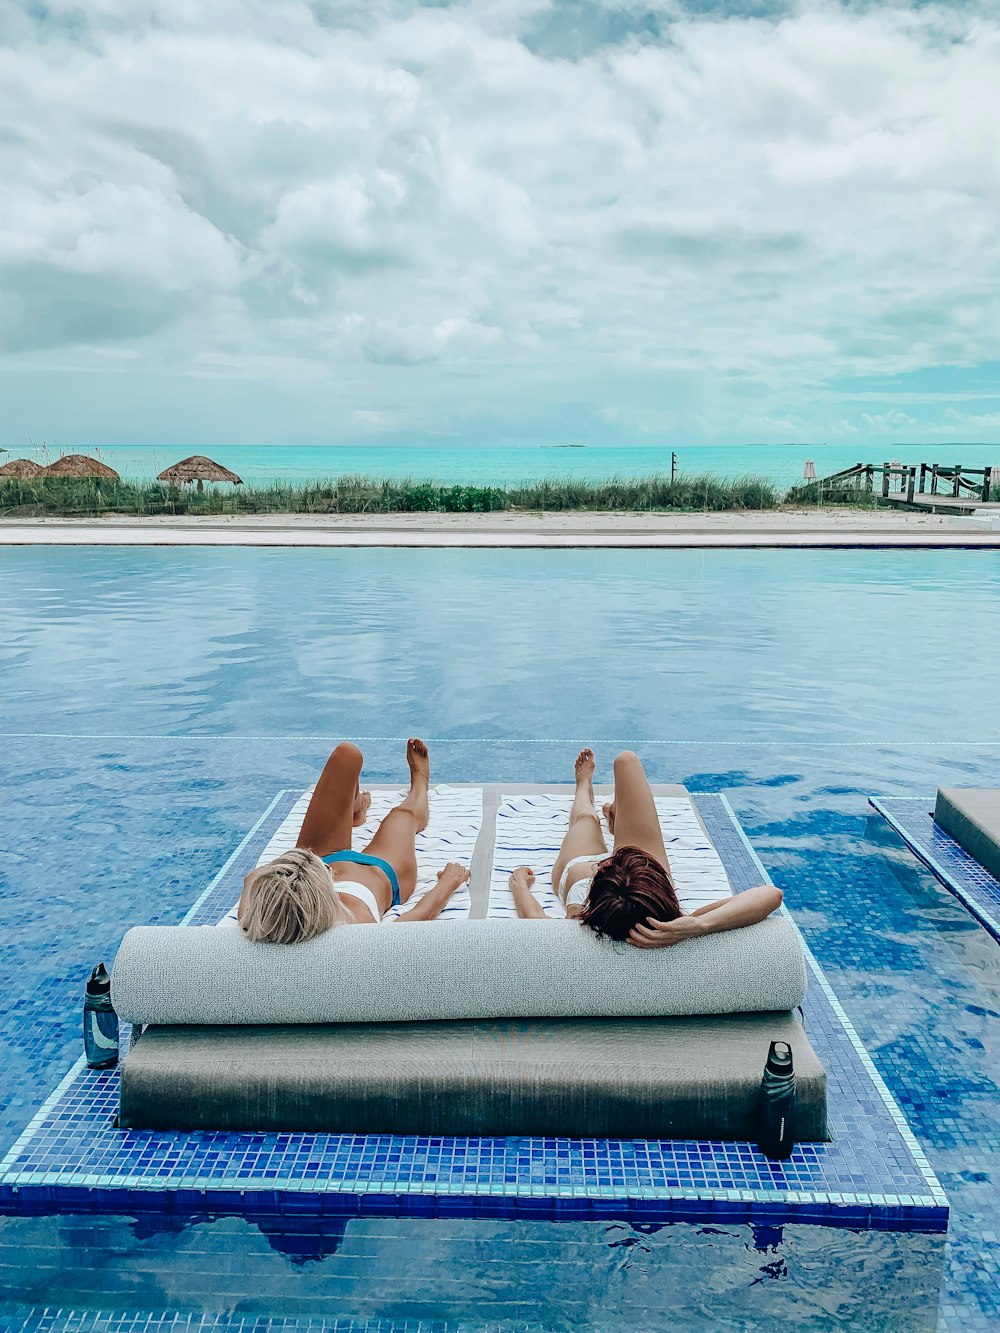 2 women lying on blue towel on blue swimming pool during daytime